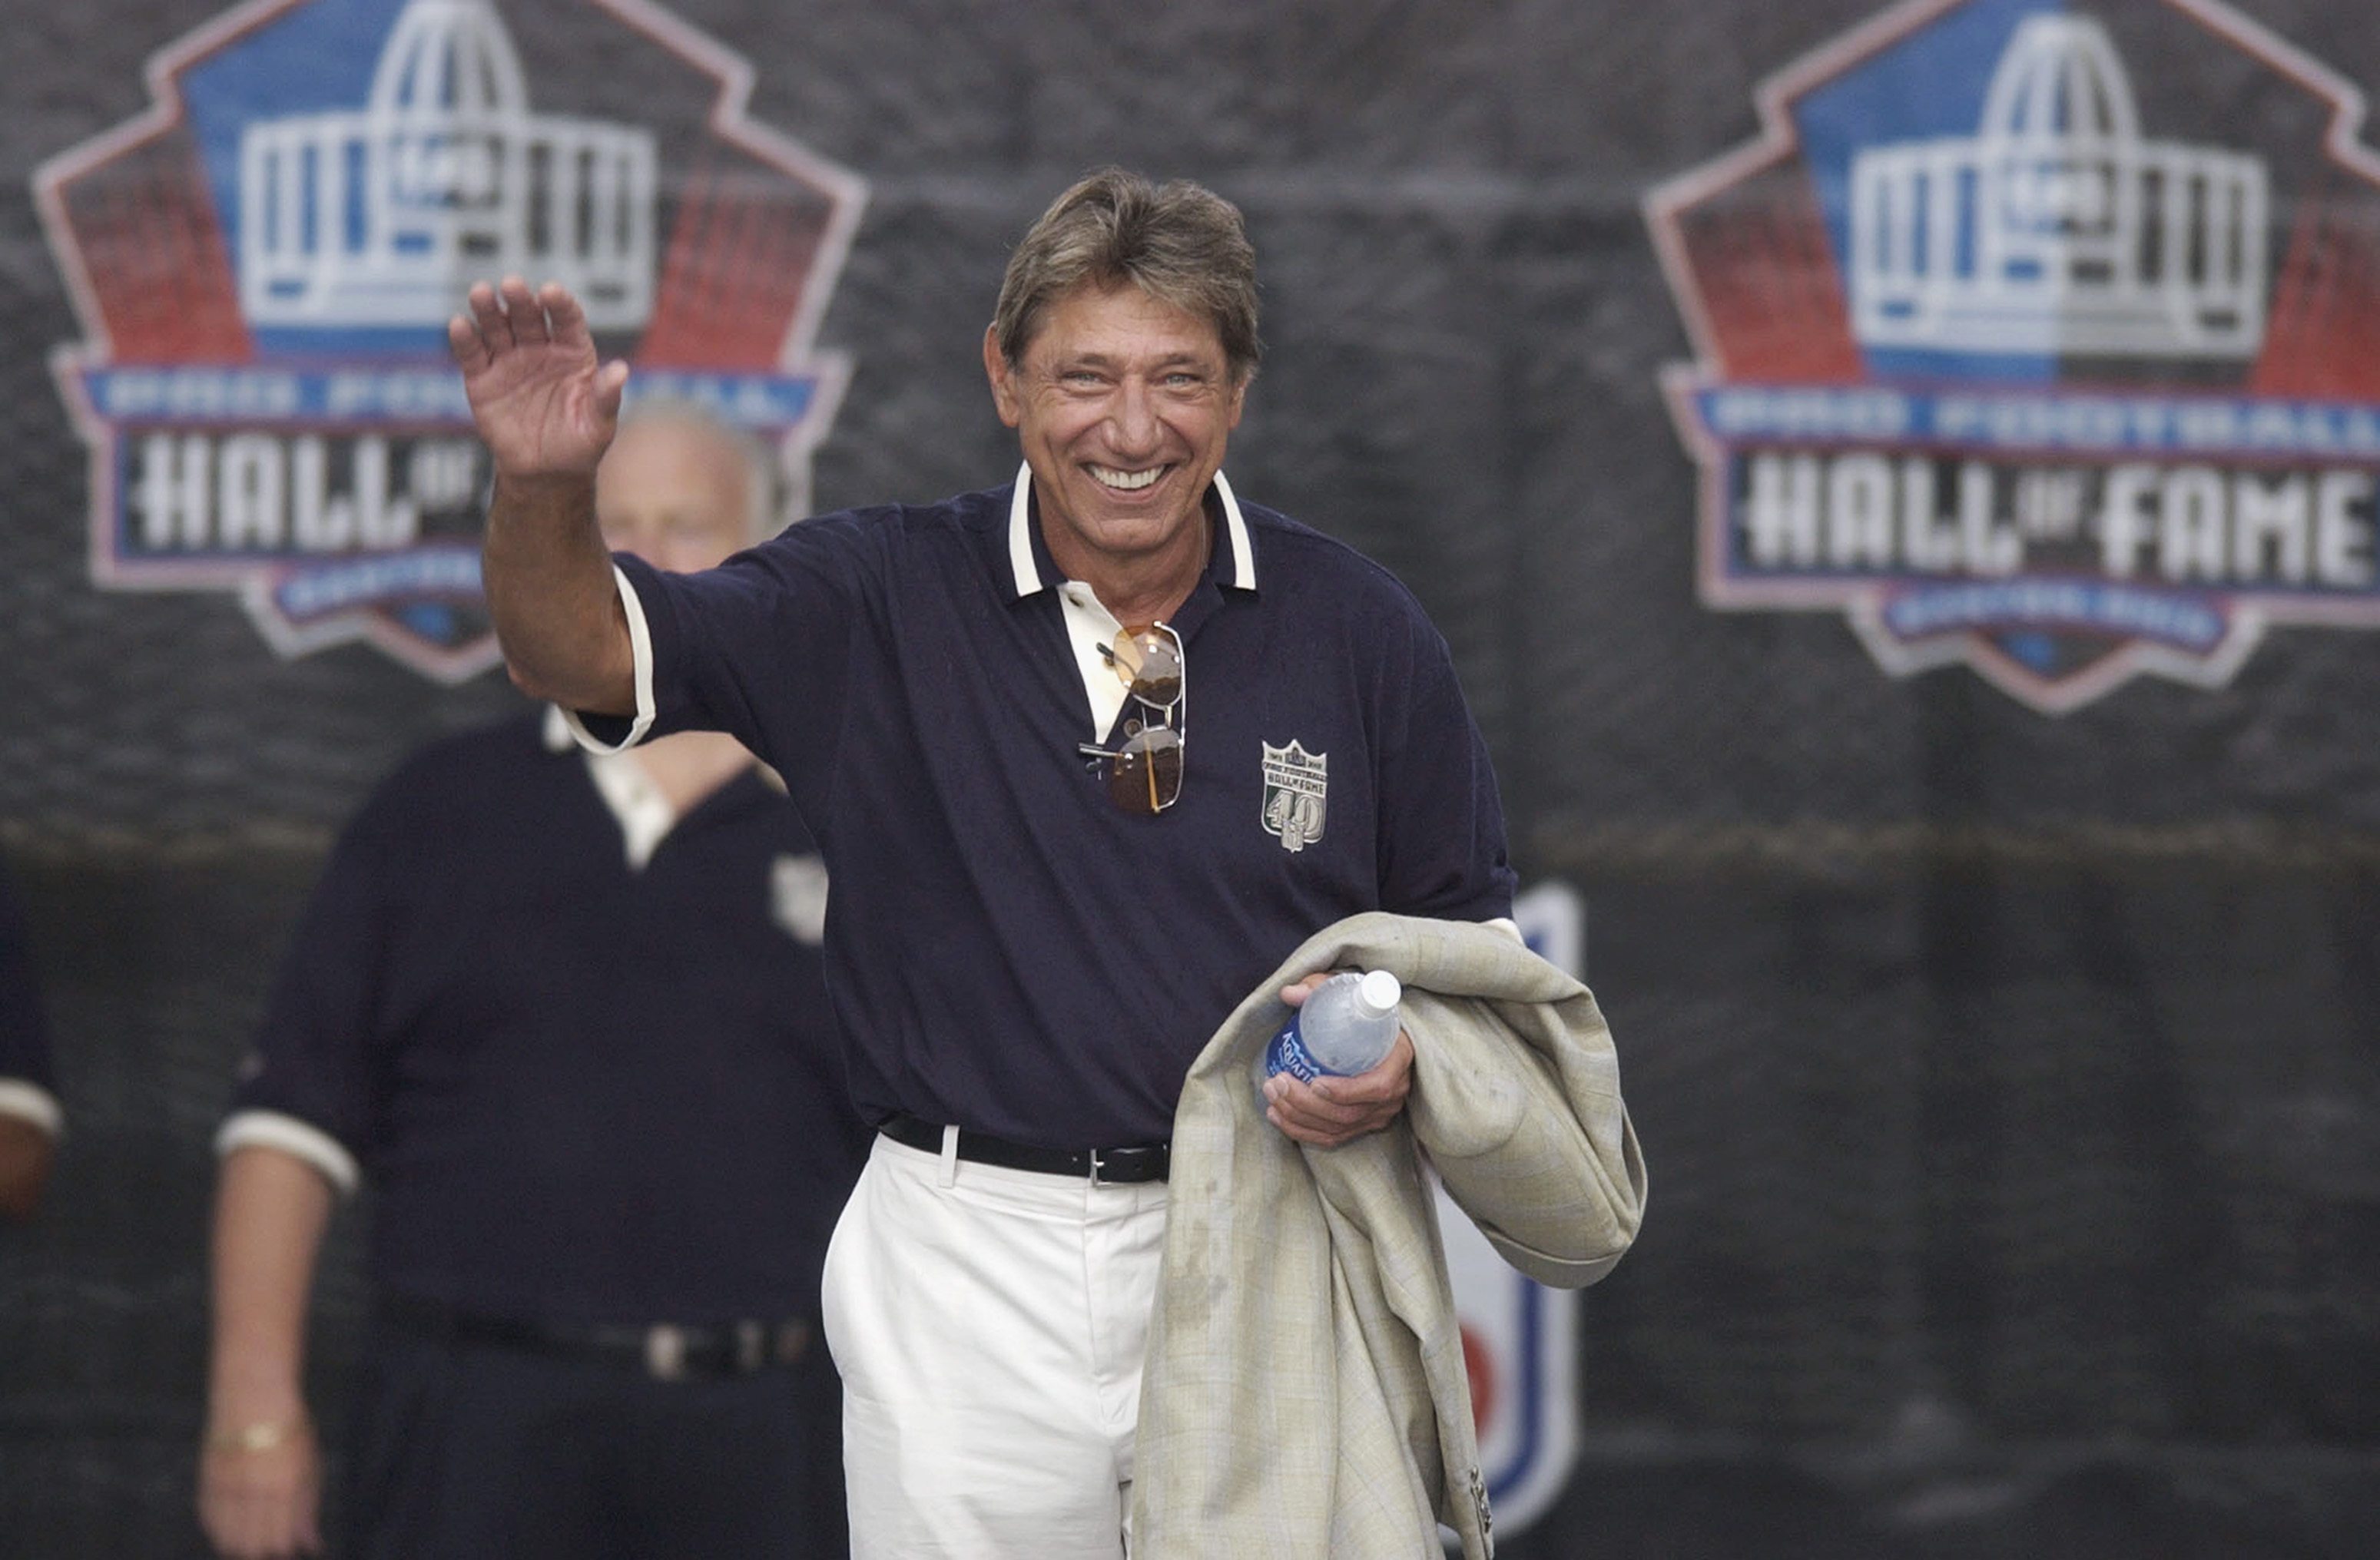 Joe Namath waves to the crowd during a Hall of Fame ceremony.